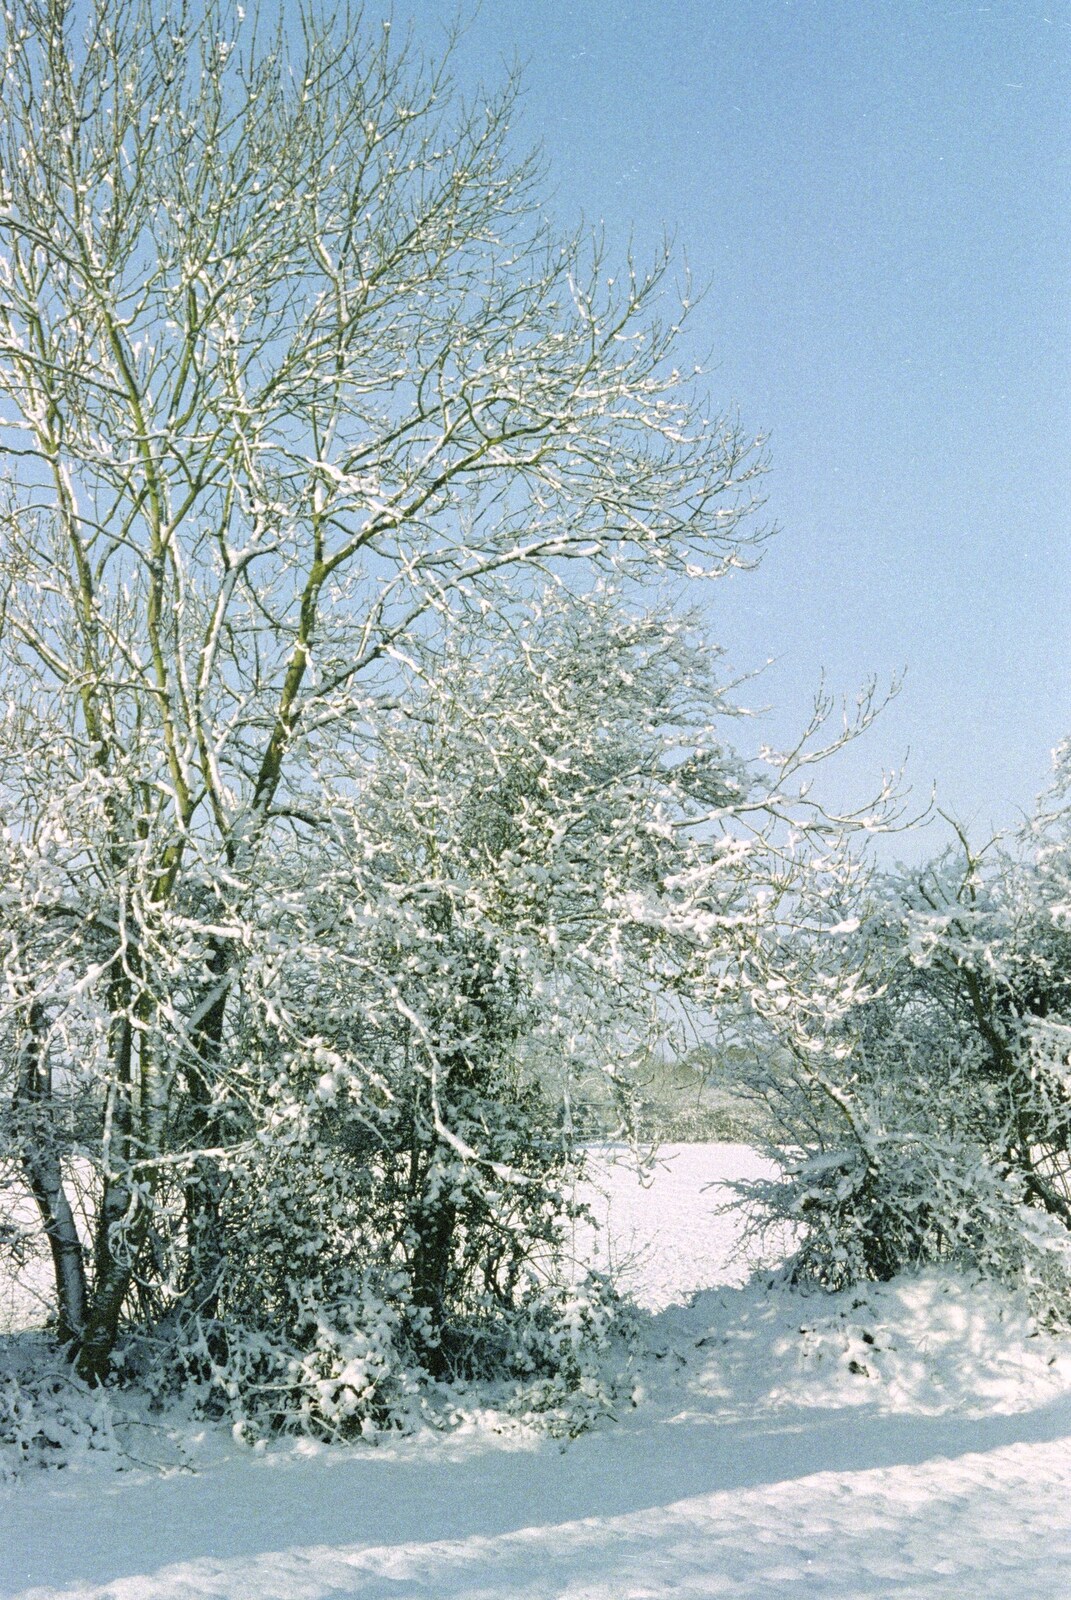 Snow on the ash tree from 3G Lab, and Building a Staircase, Brome, Suffolk - 11th February 2001